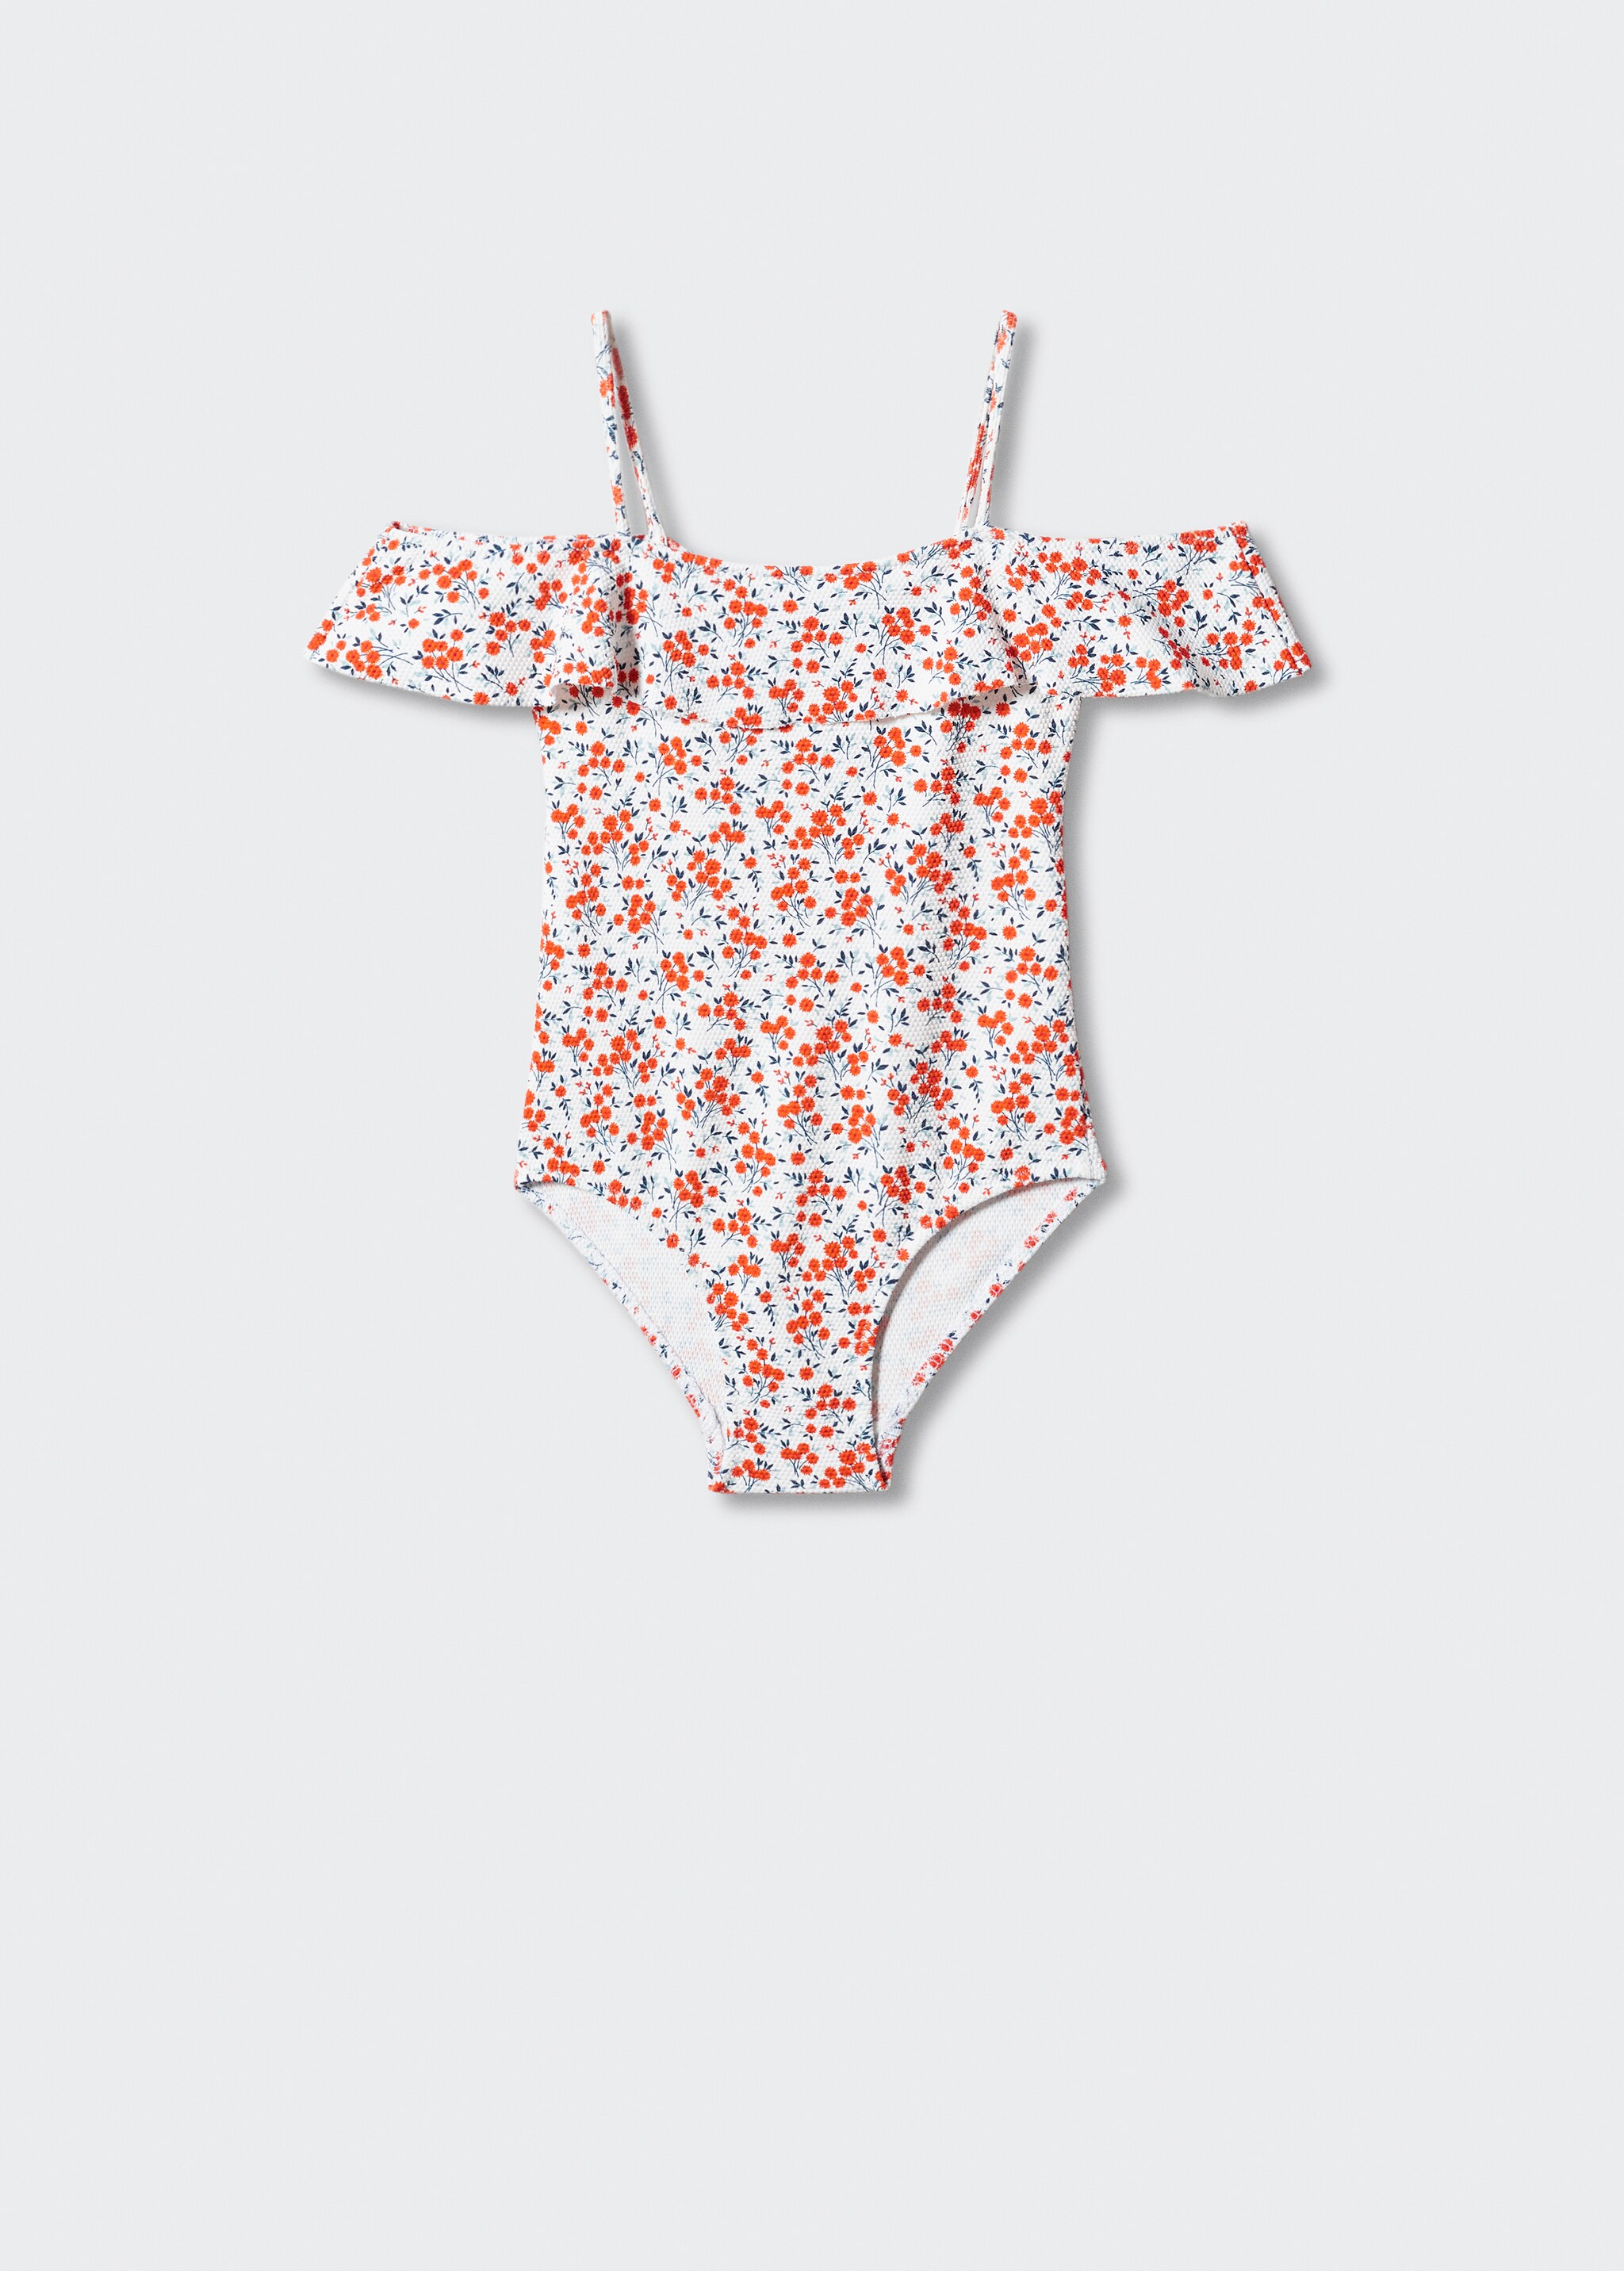 Ruffled floral print swimsuit - Article without model